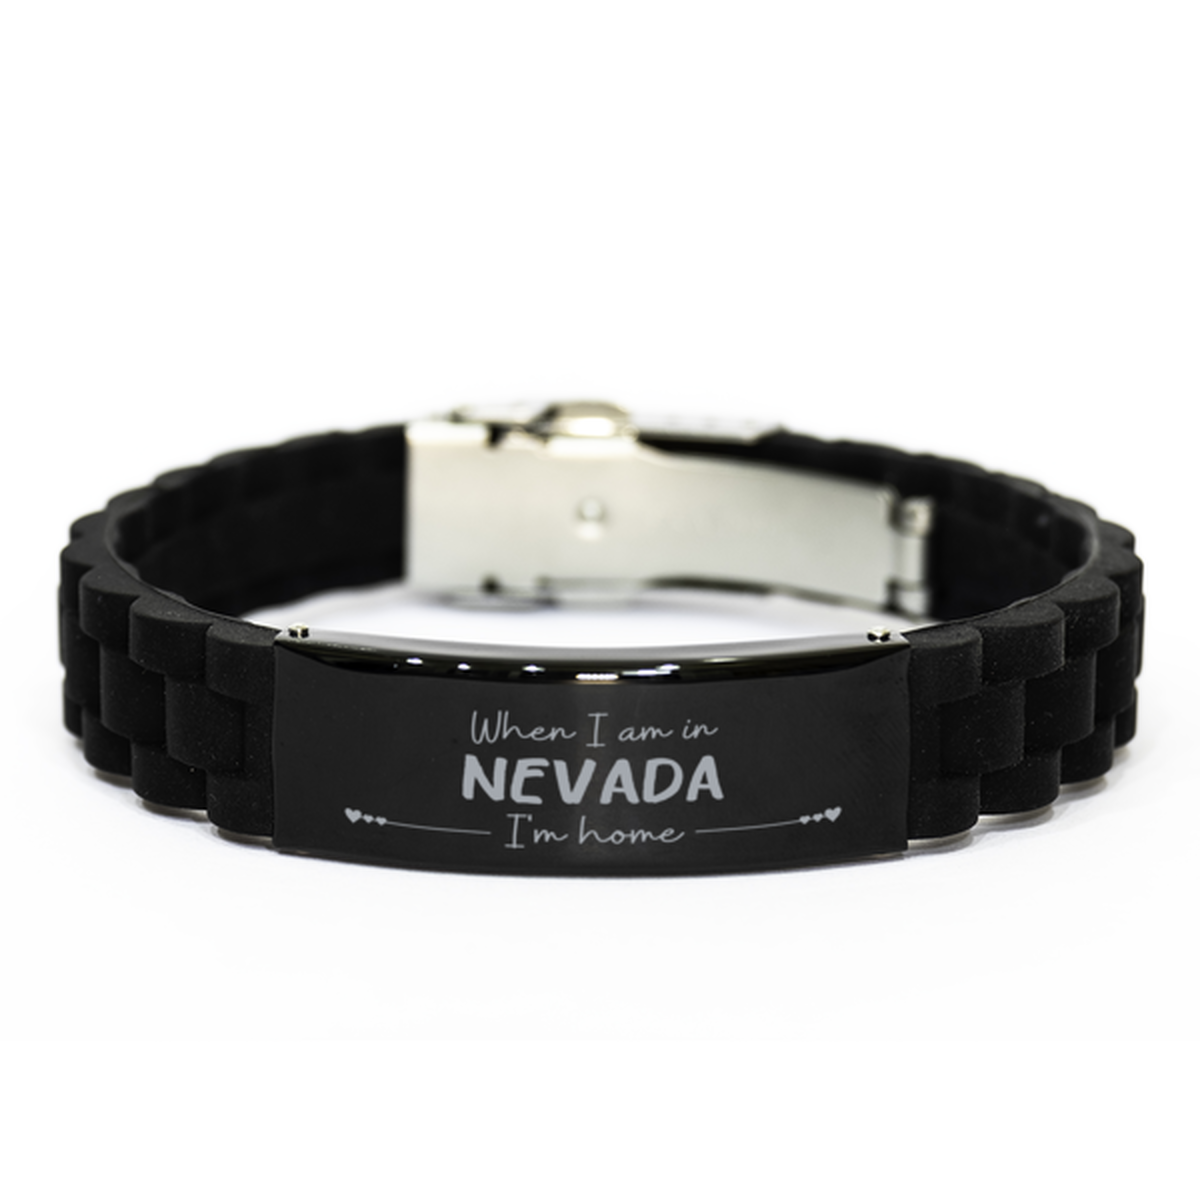 When I am in Nevada I'm home Black Glidelock Clasp Bracelet, Cheap Gifts For Nevada, State Nevada Birthday Gifts for Friends Coworker